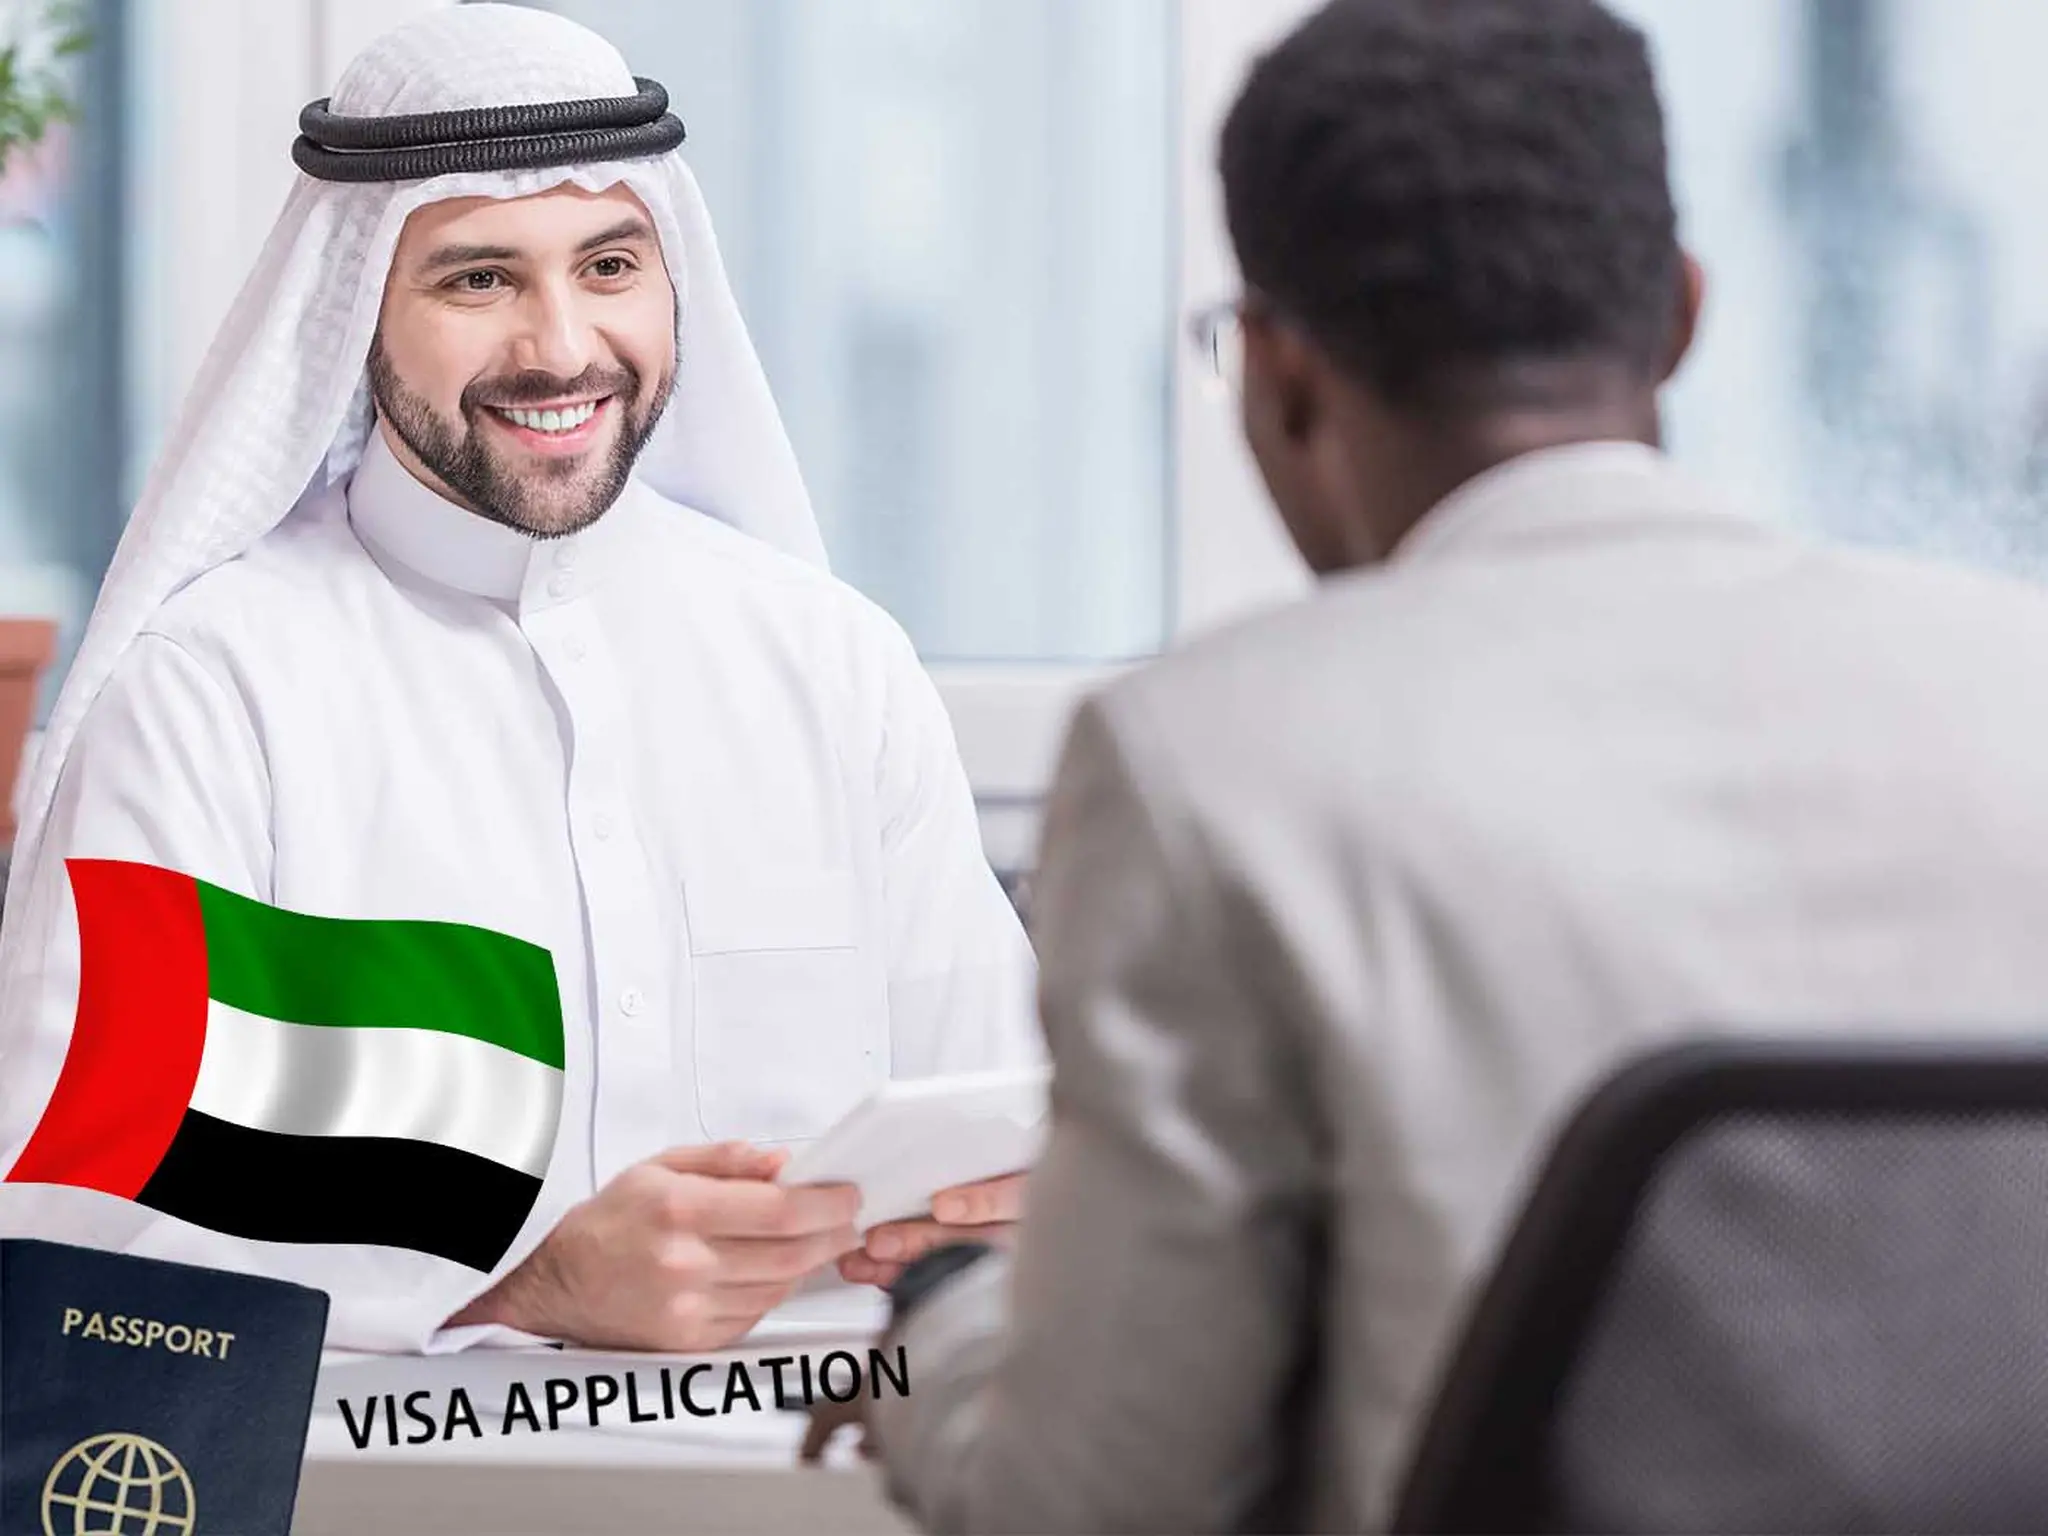 Granting a virtual license to this category of residents to work in the UAE without residency